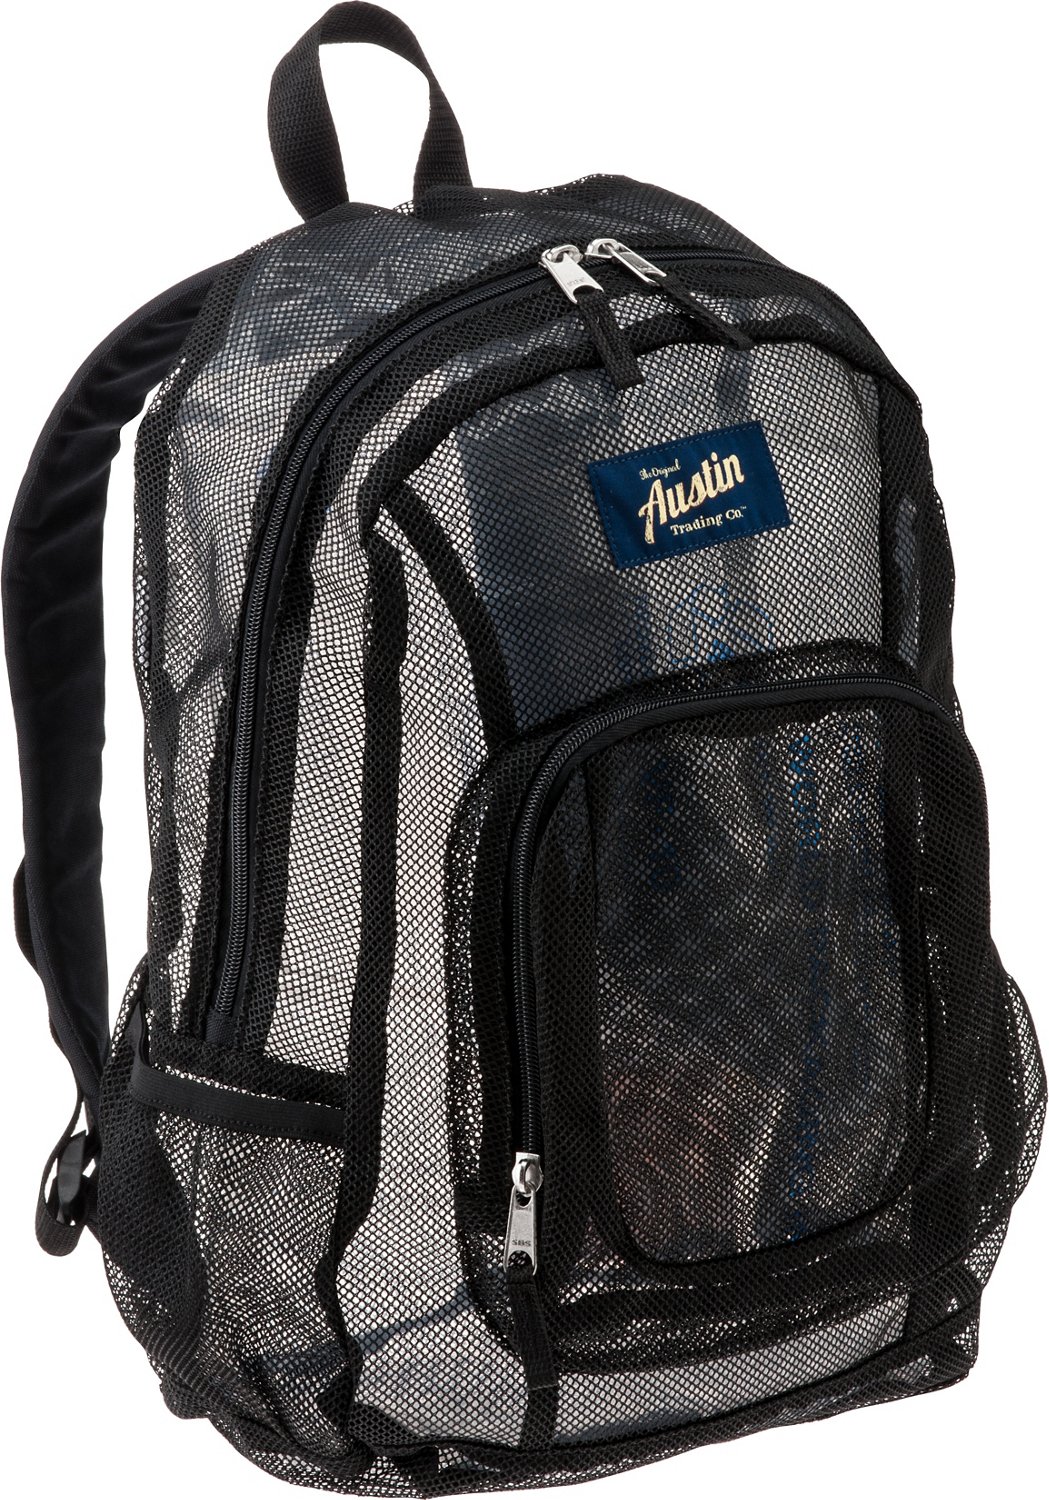 Austin Trading Co.™ Classic Mesh Backpack | Academy